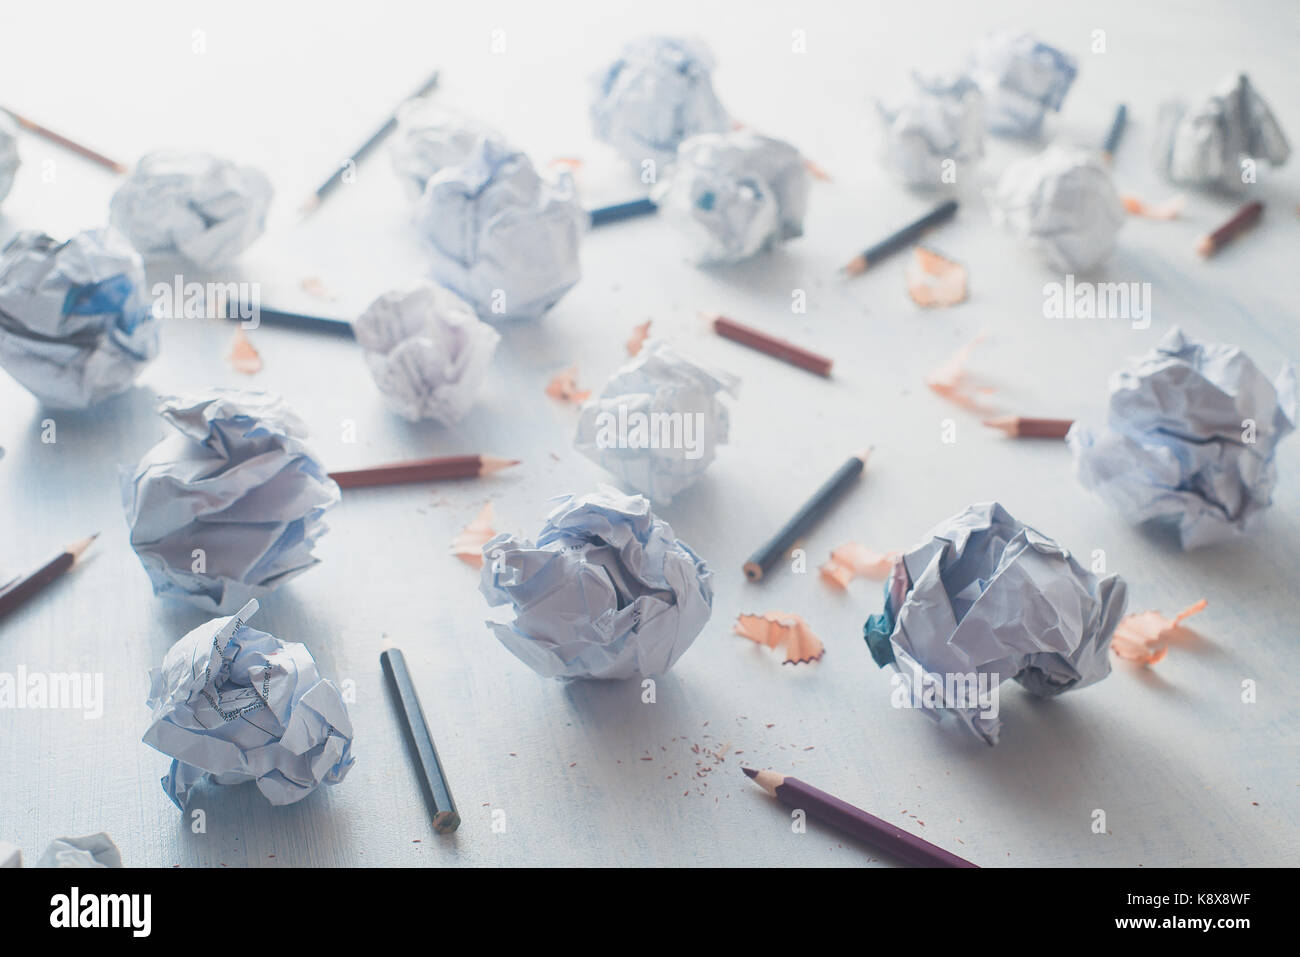 Close-up of crumpled paper balls on a white wooden background with pencils and pencil shavings. Creative writing concept. High key still life. Stock Photo